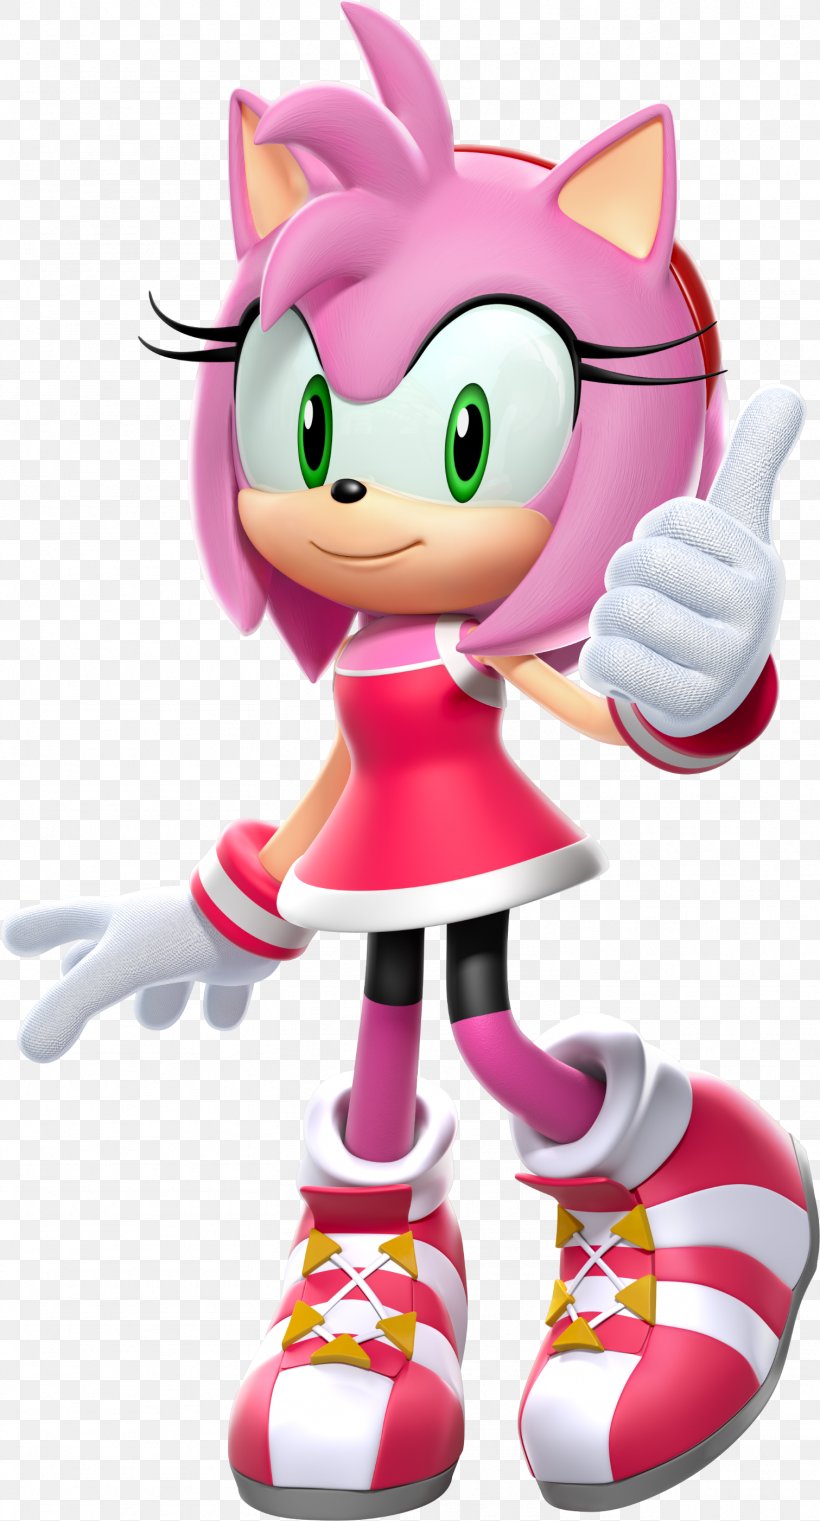 Mario & Sonic At The Rio 2016 Olympic Games Sonic The Hedgehog Amy Rose Mario & Sonic At The Olympic Games Sonic & Sega All-Stars Racing, PNG, 1511x2804px, Sonic The Hedgehog, Action Figure, Amy Rose, Art, Cartoon Download Free